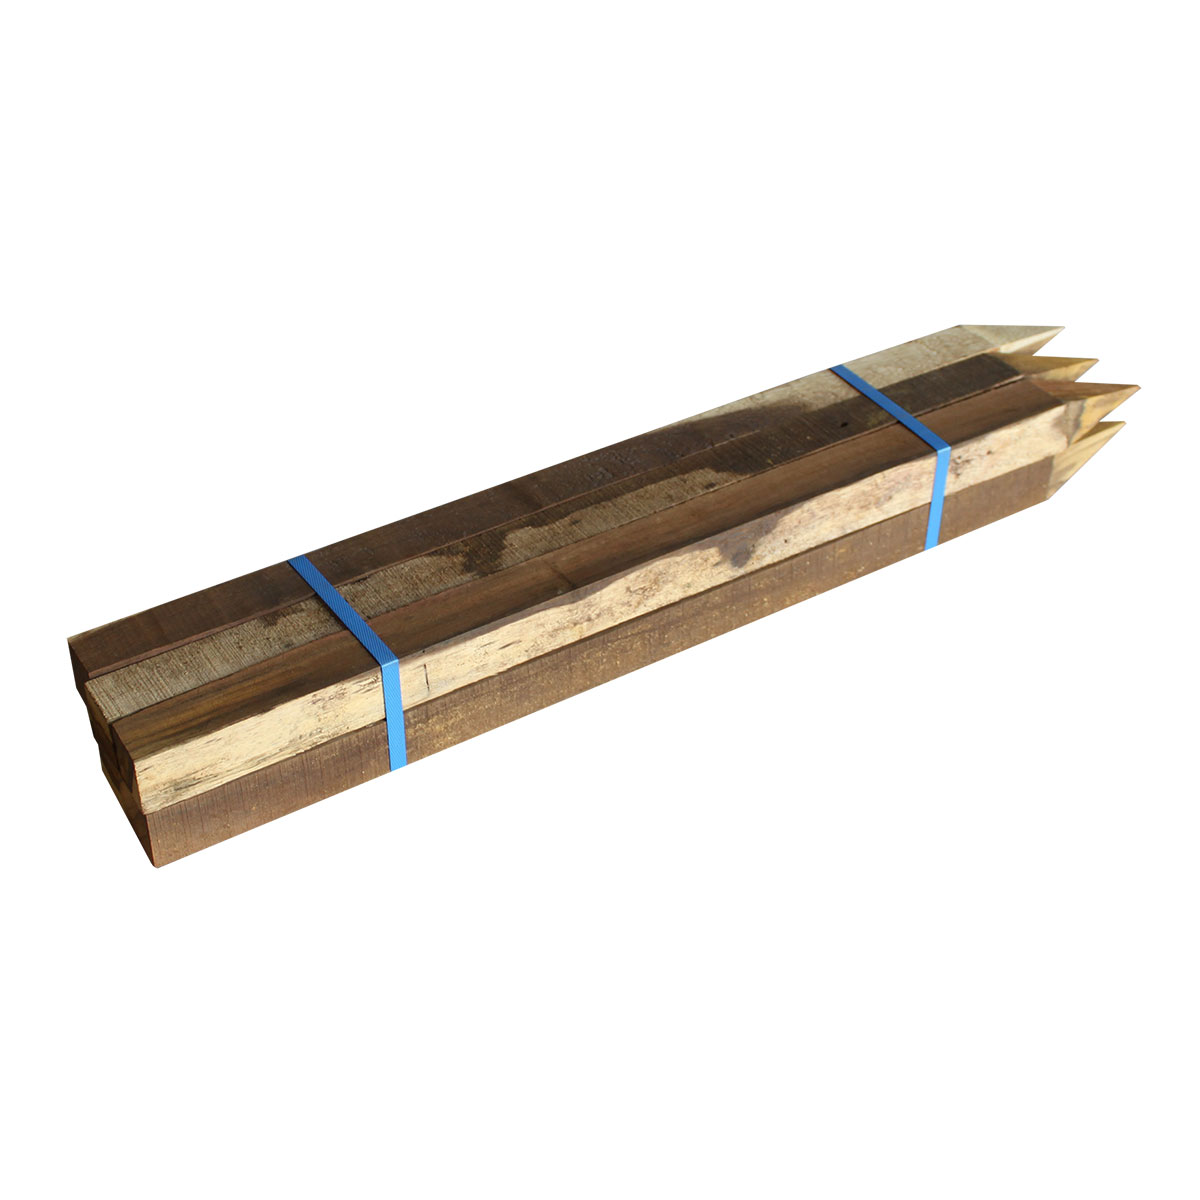 Hardwood Stakes 50 x 50 x 900mm - 6 Pack